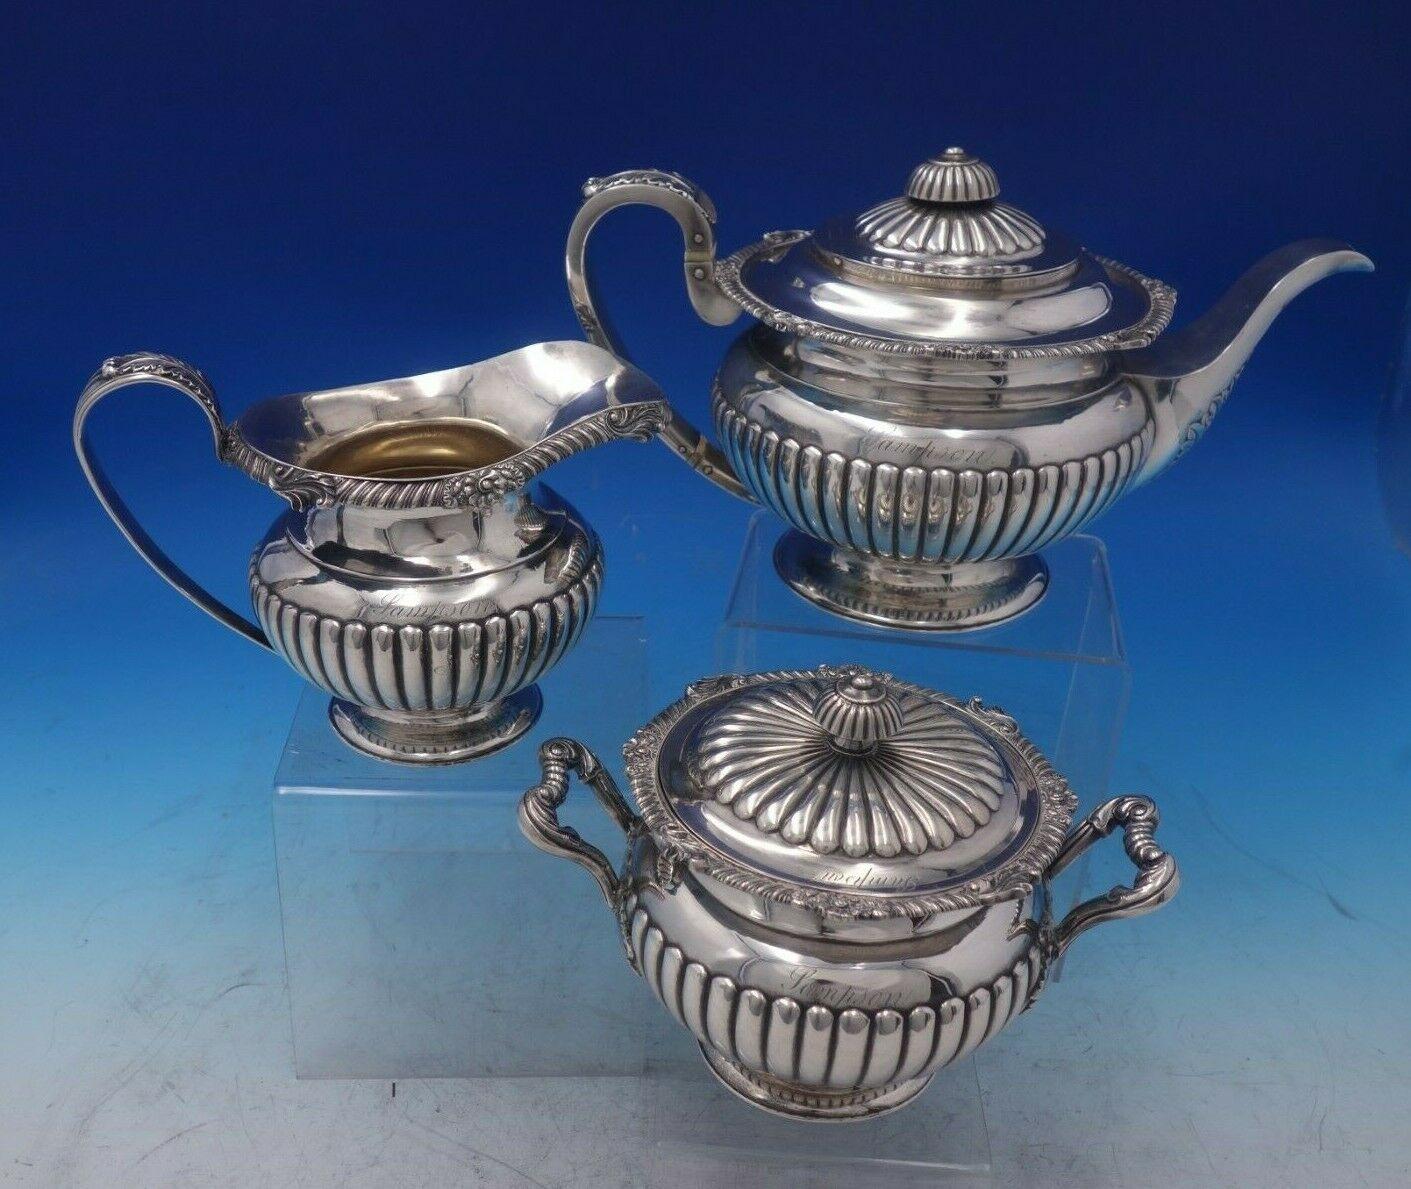 Wong Shing

Gorgeous Wong Shing Chinese Export sterling silver three-piece tea set, circa 1840-1870. This set includes:

1 - Tea Pot: Measures 7